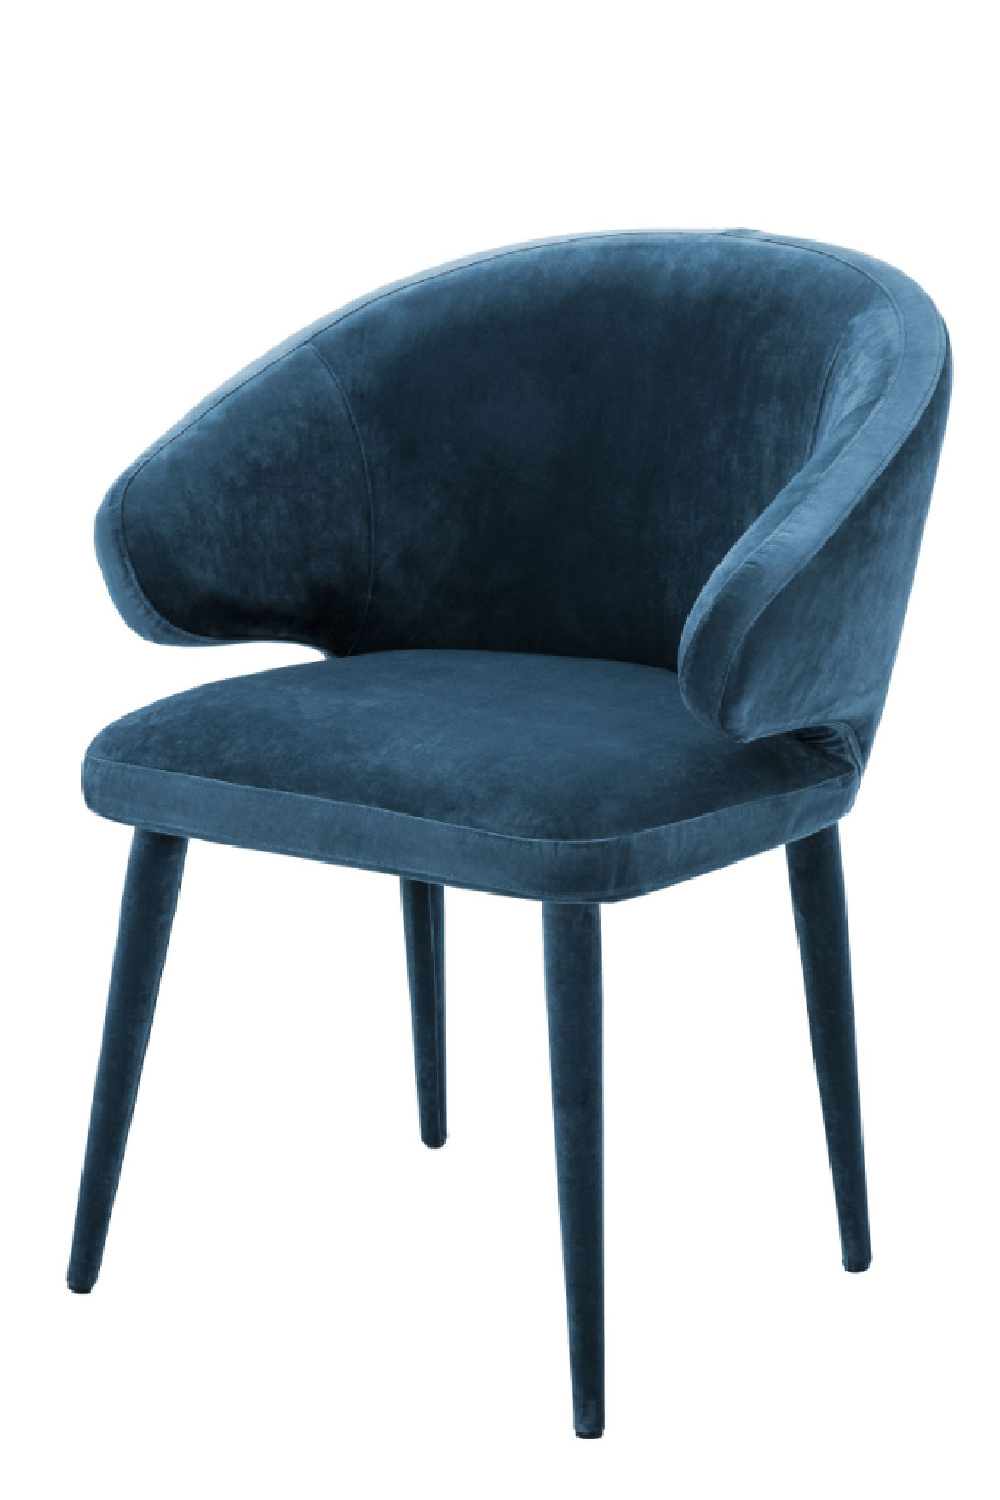 Curved Back Dining Chair | Eichholtz Cardinale | Oroa.com